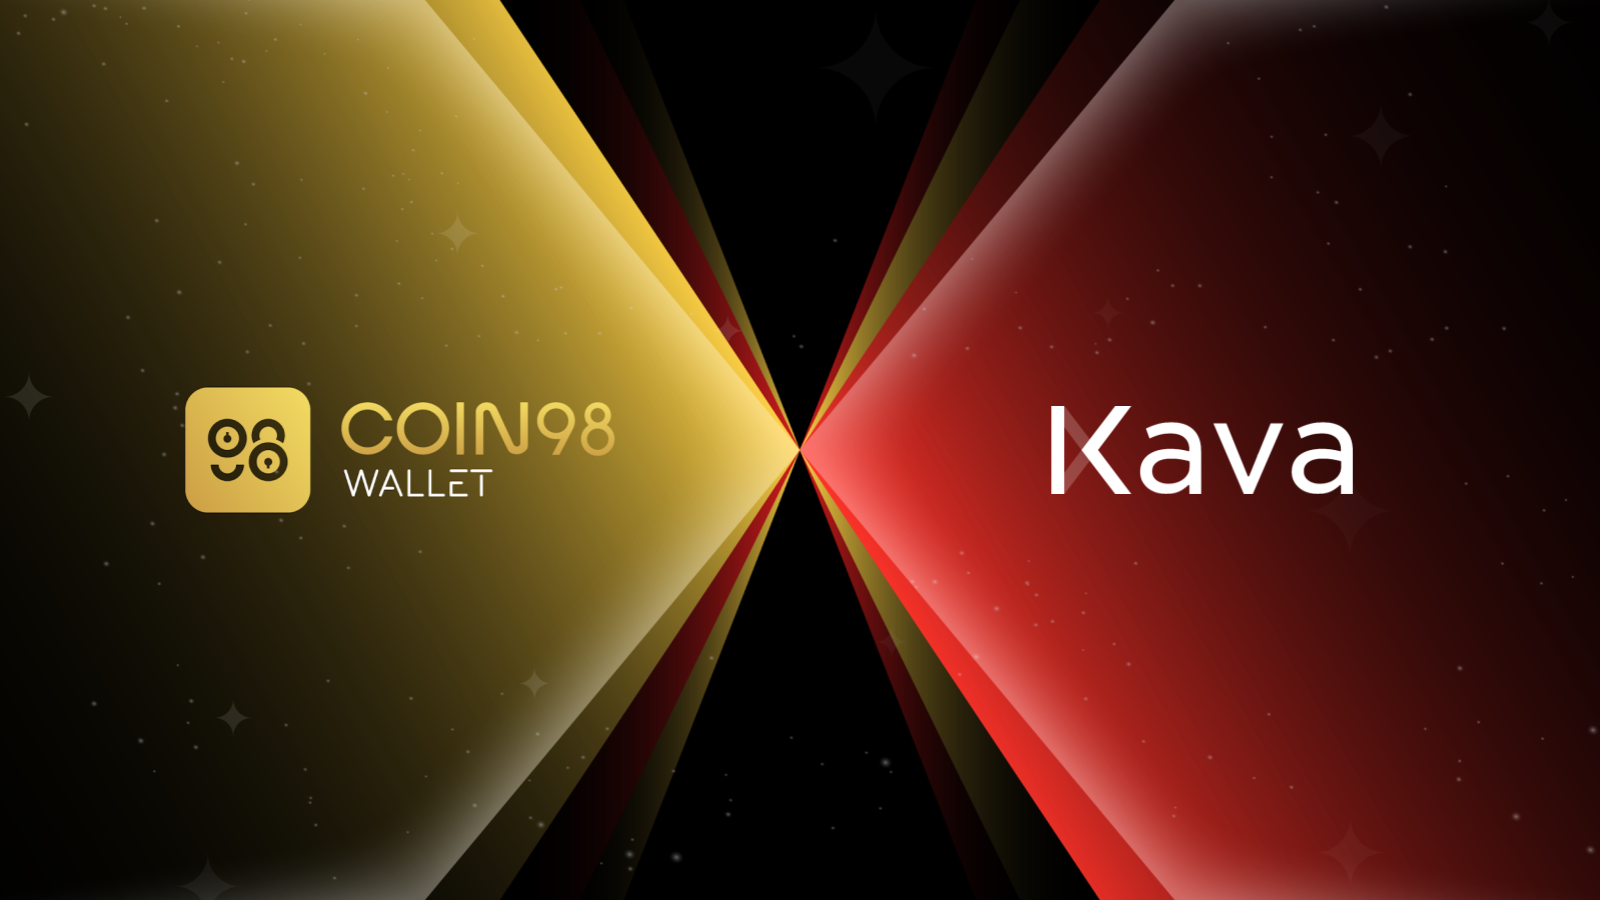 Coin98 Wallet now integrates Kava in our system as one of the 22+ supported blockchains